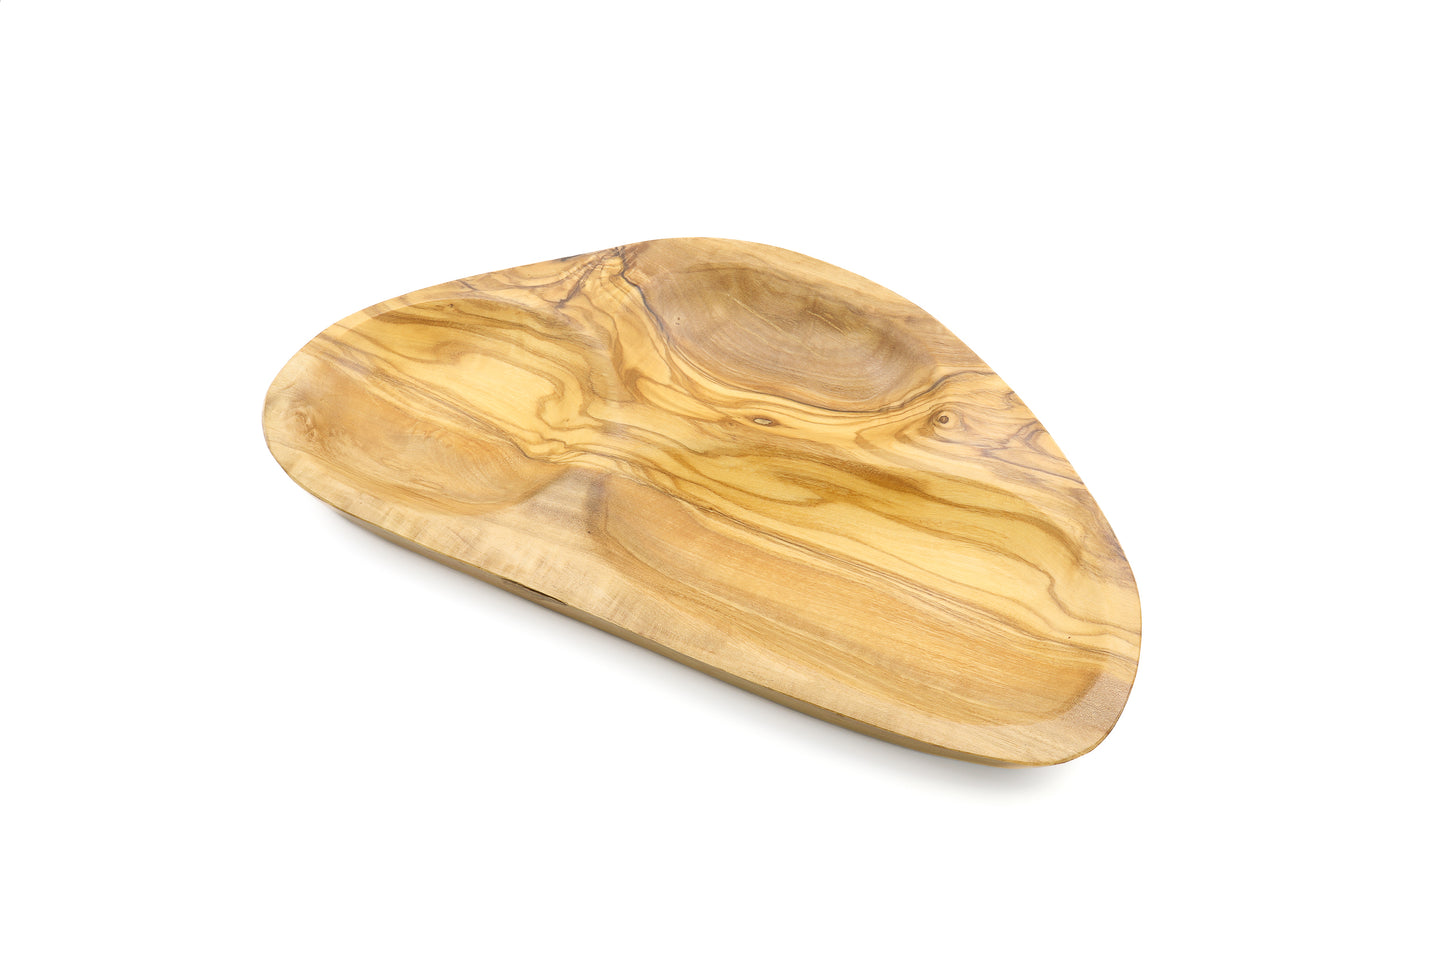 Artisan-made wooden serving tray in beautiful olive wood, with distinctive sections